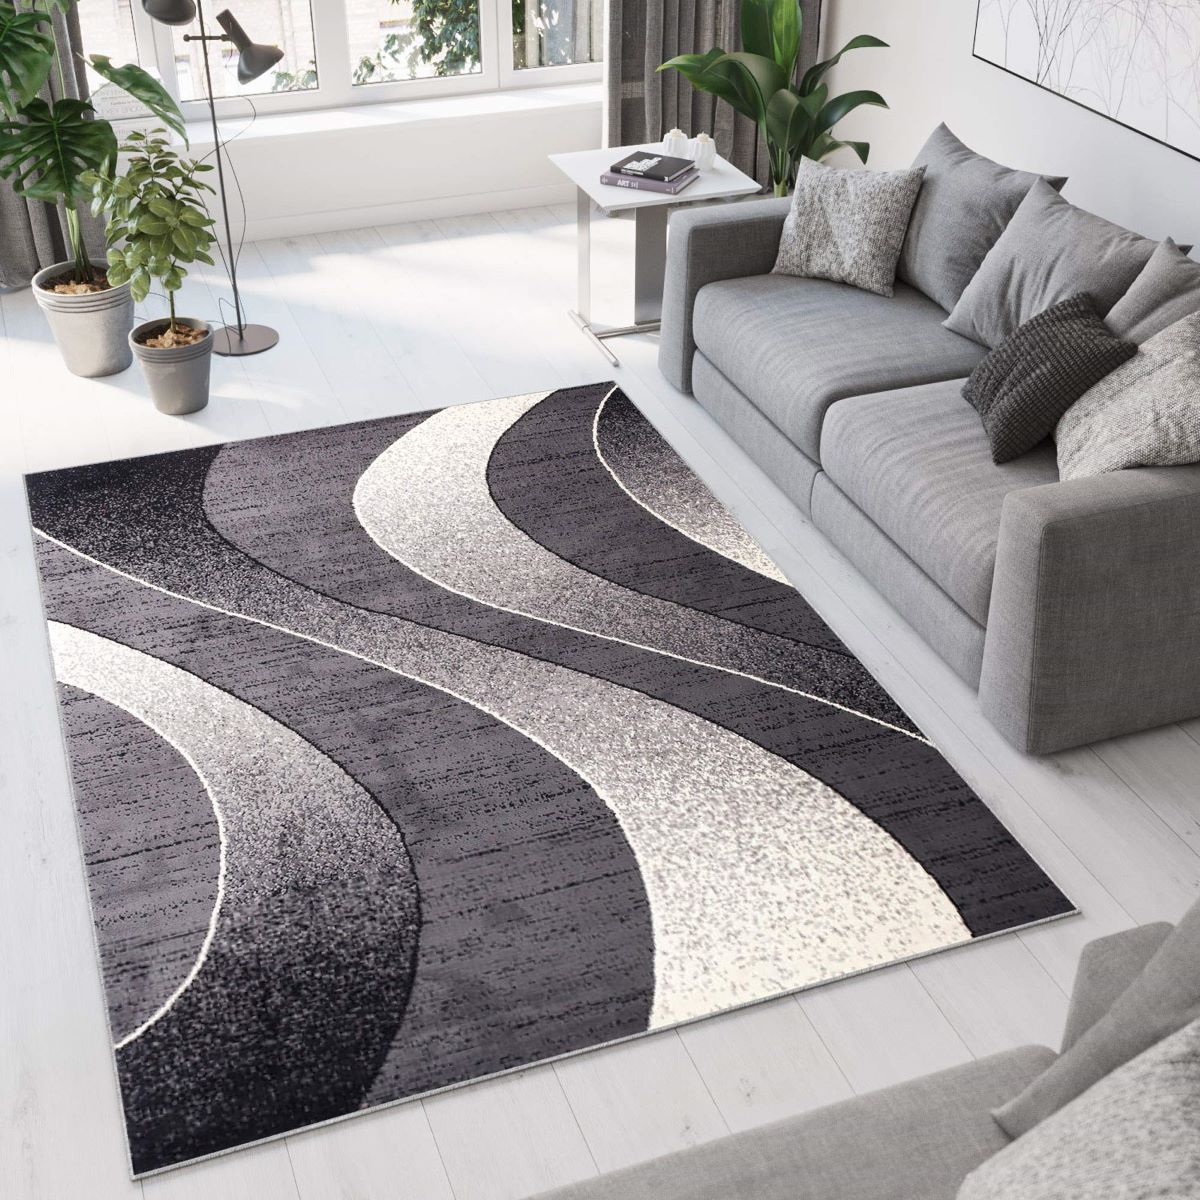 15 Incredible Rugs For Living Room For 2023